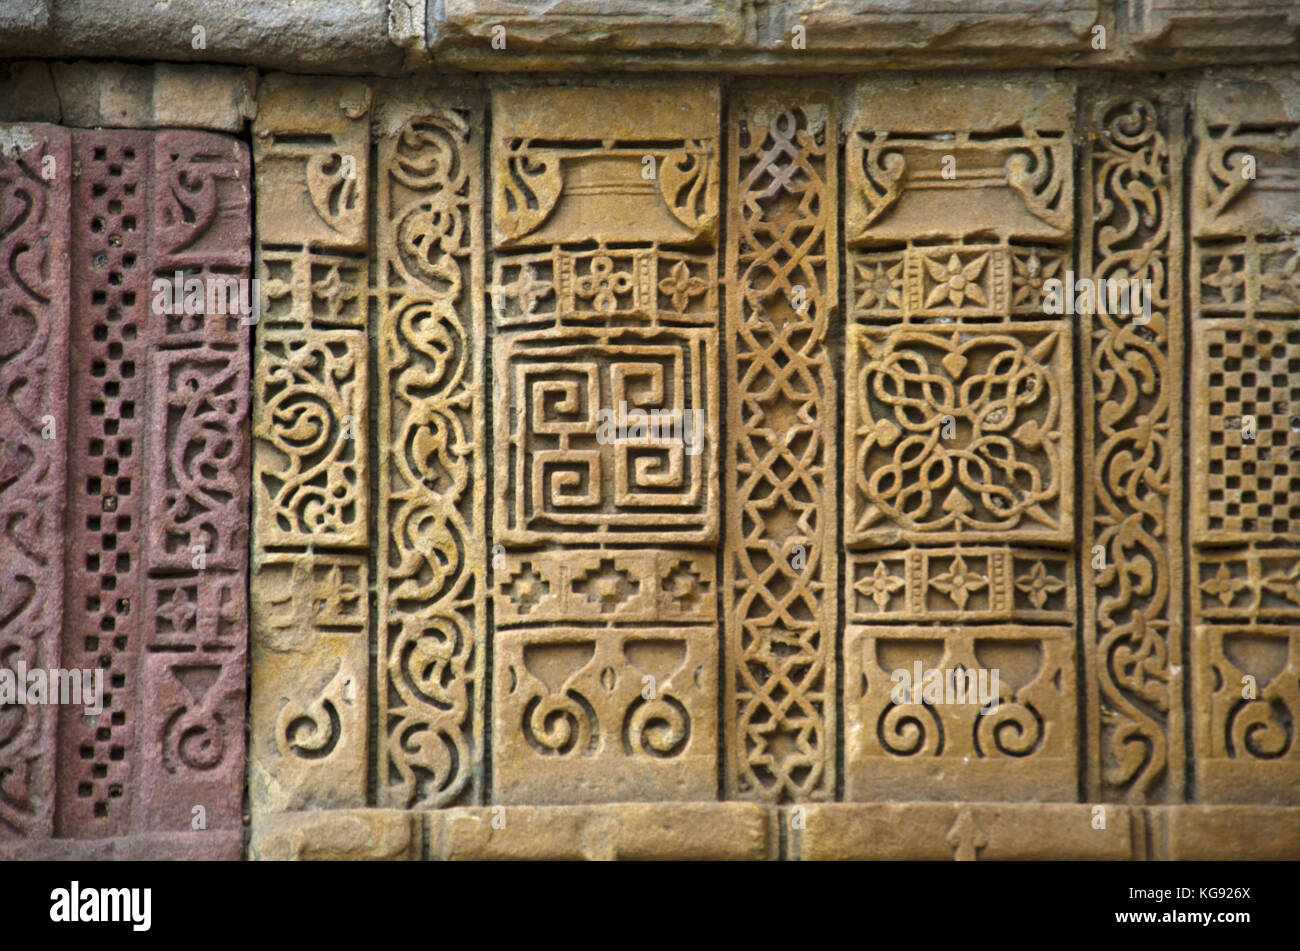 Stone carvings on outer wall of Jami Masjid (Mosque), UNESCO protected Champaner - Pavagadh Archaeological Park, Gujarat, India. Dates to 1513, constr Stock Photo